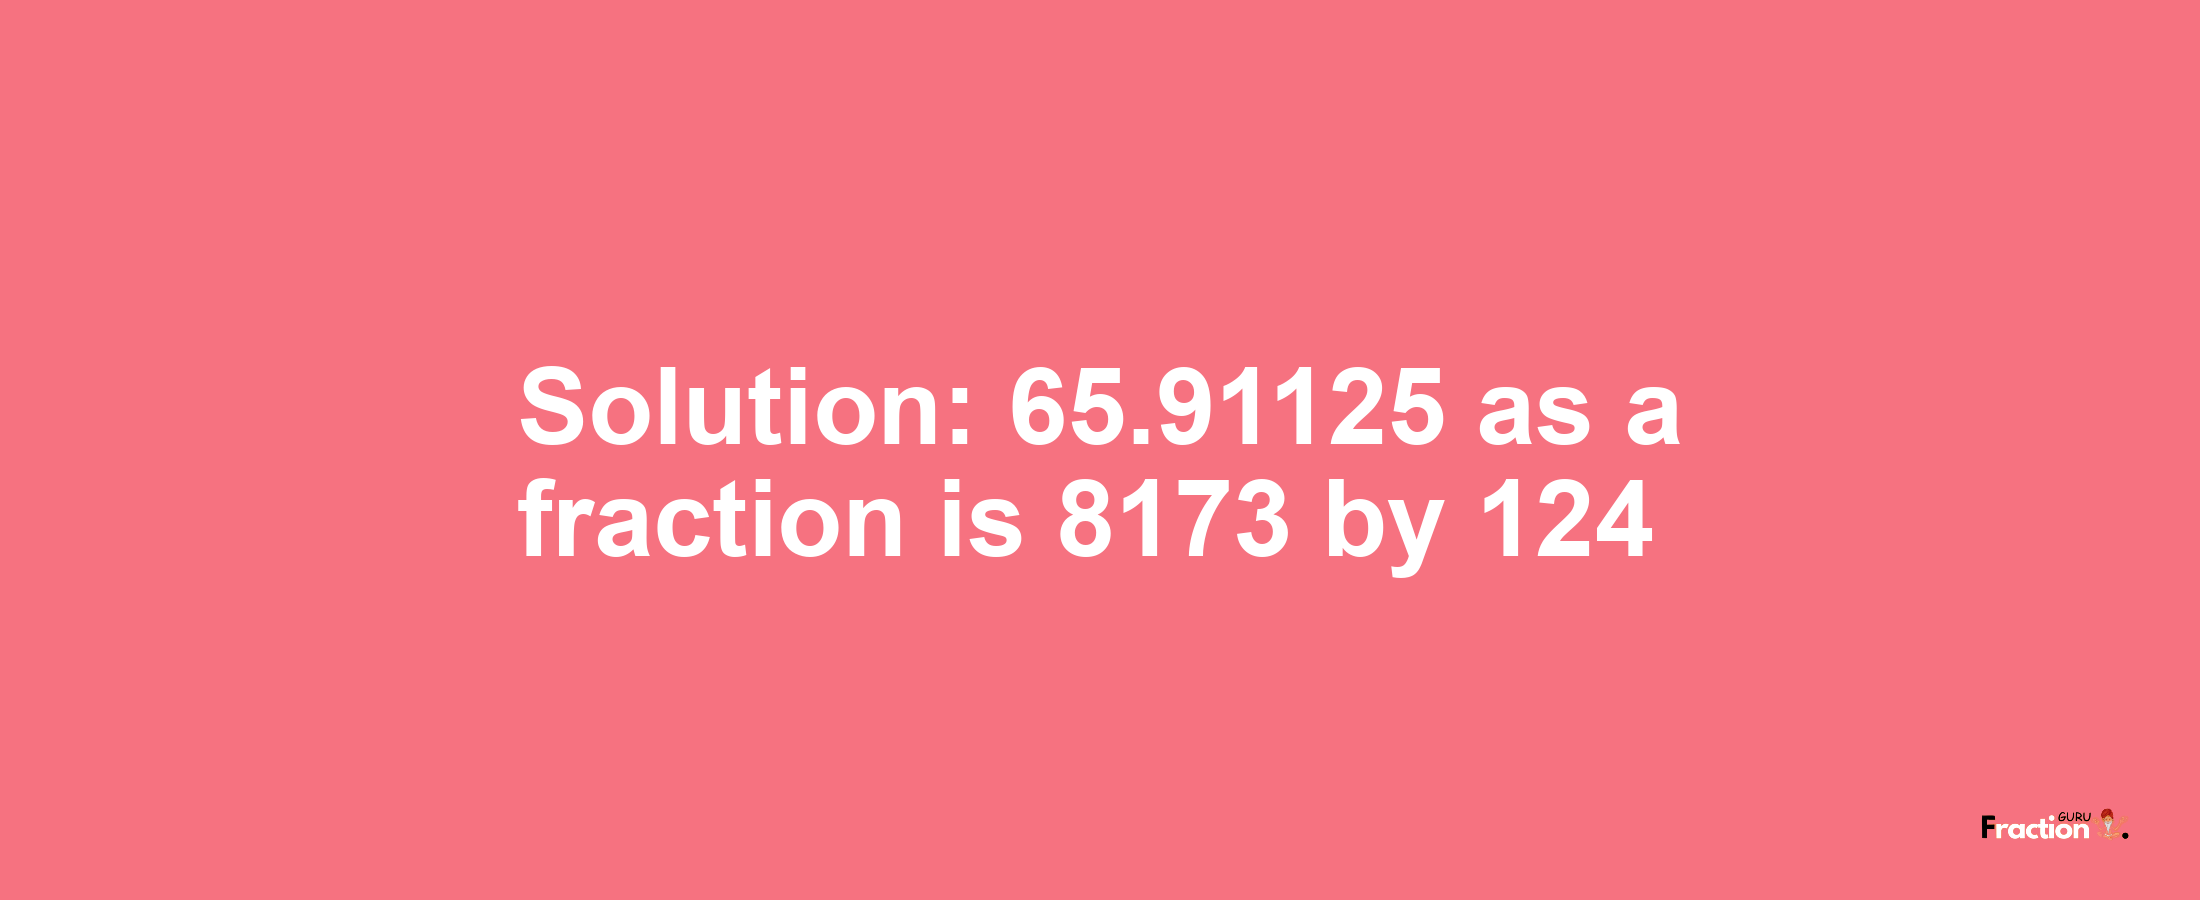 Solution:65.91125 as a fraction is 8173/124